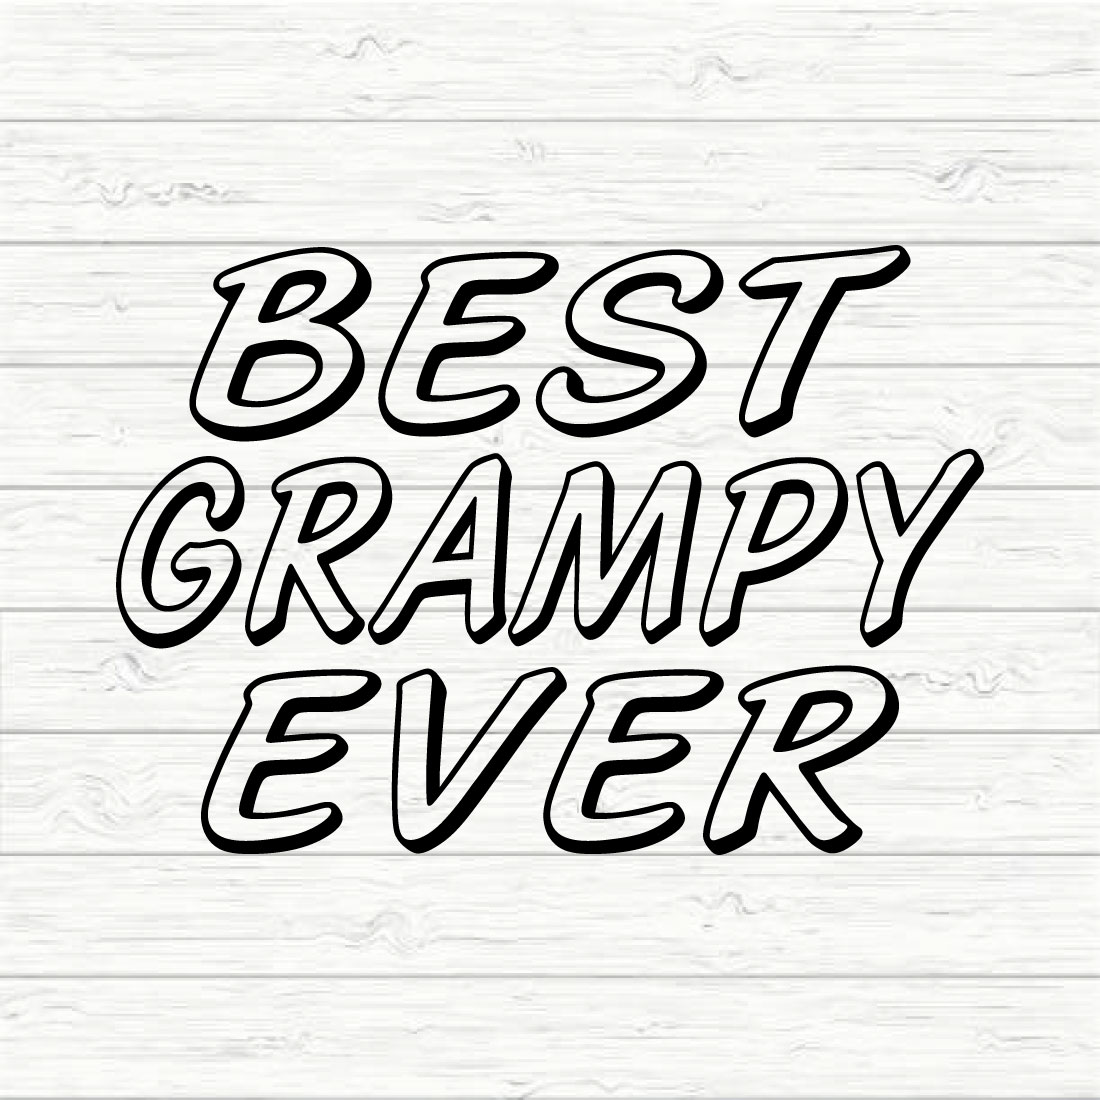 Best grampy ever cover image.